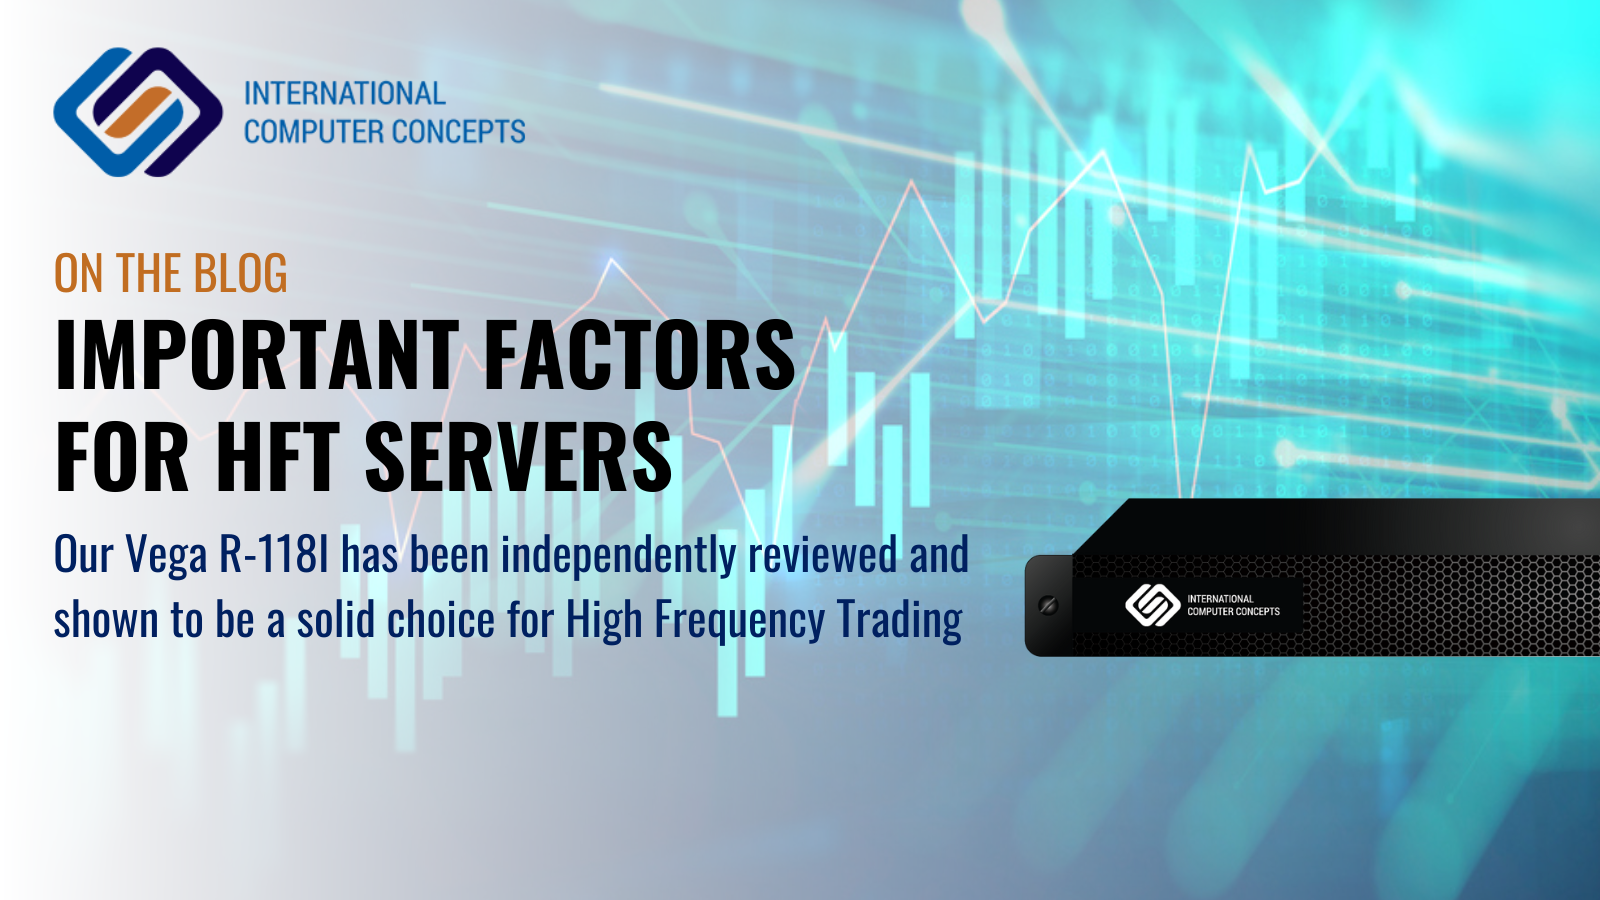 Most important factors for High Frequency Trading Servers